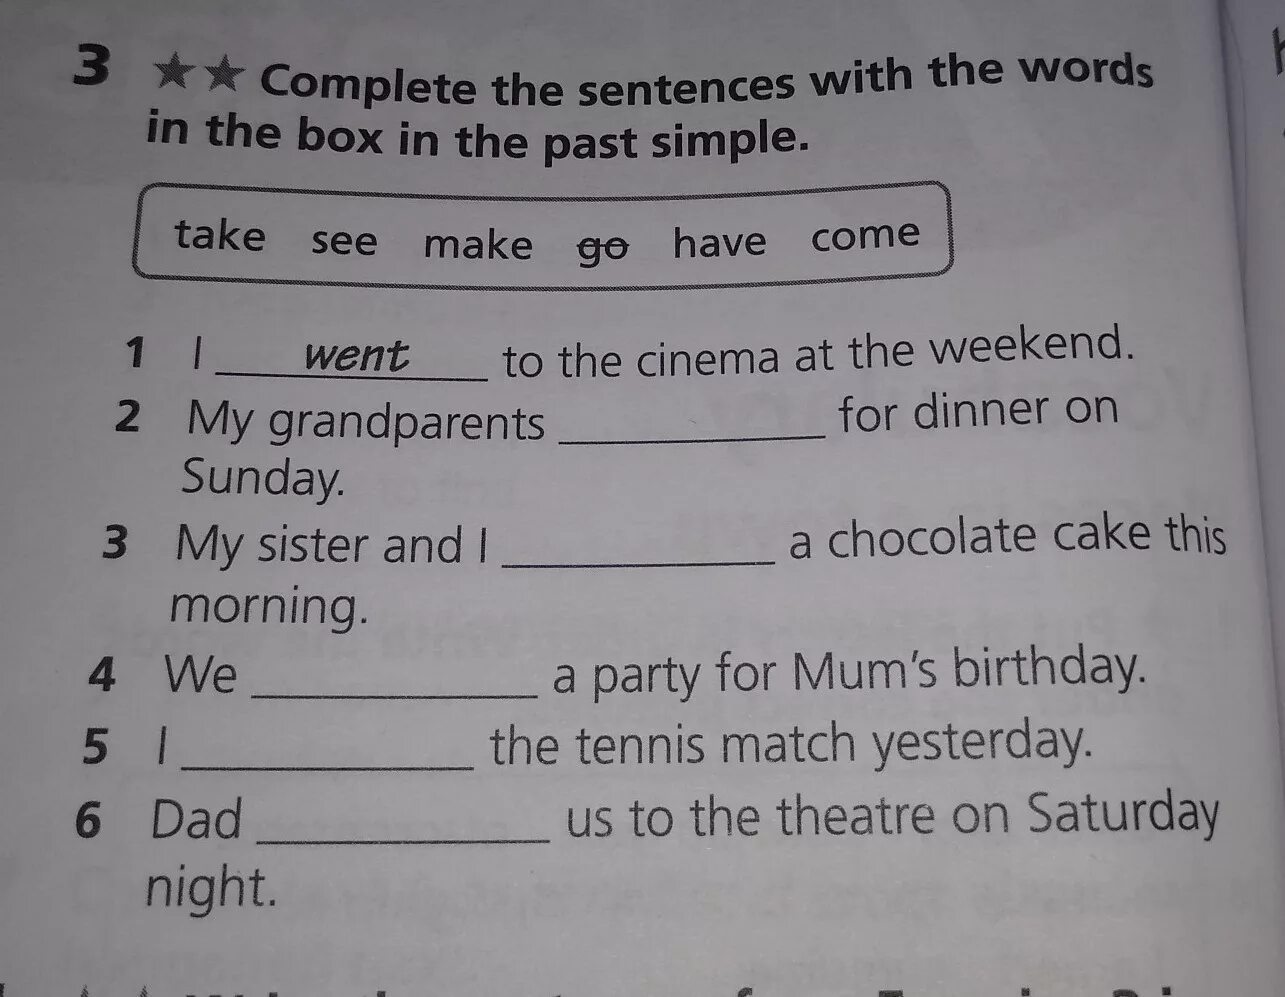 Complete the sentences with the. Complete the sentences with the Words in the Box. Complete the sentences with the Words. Complete the Words in the sentences. Complete the sentences with tags